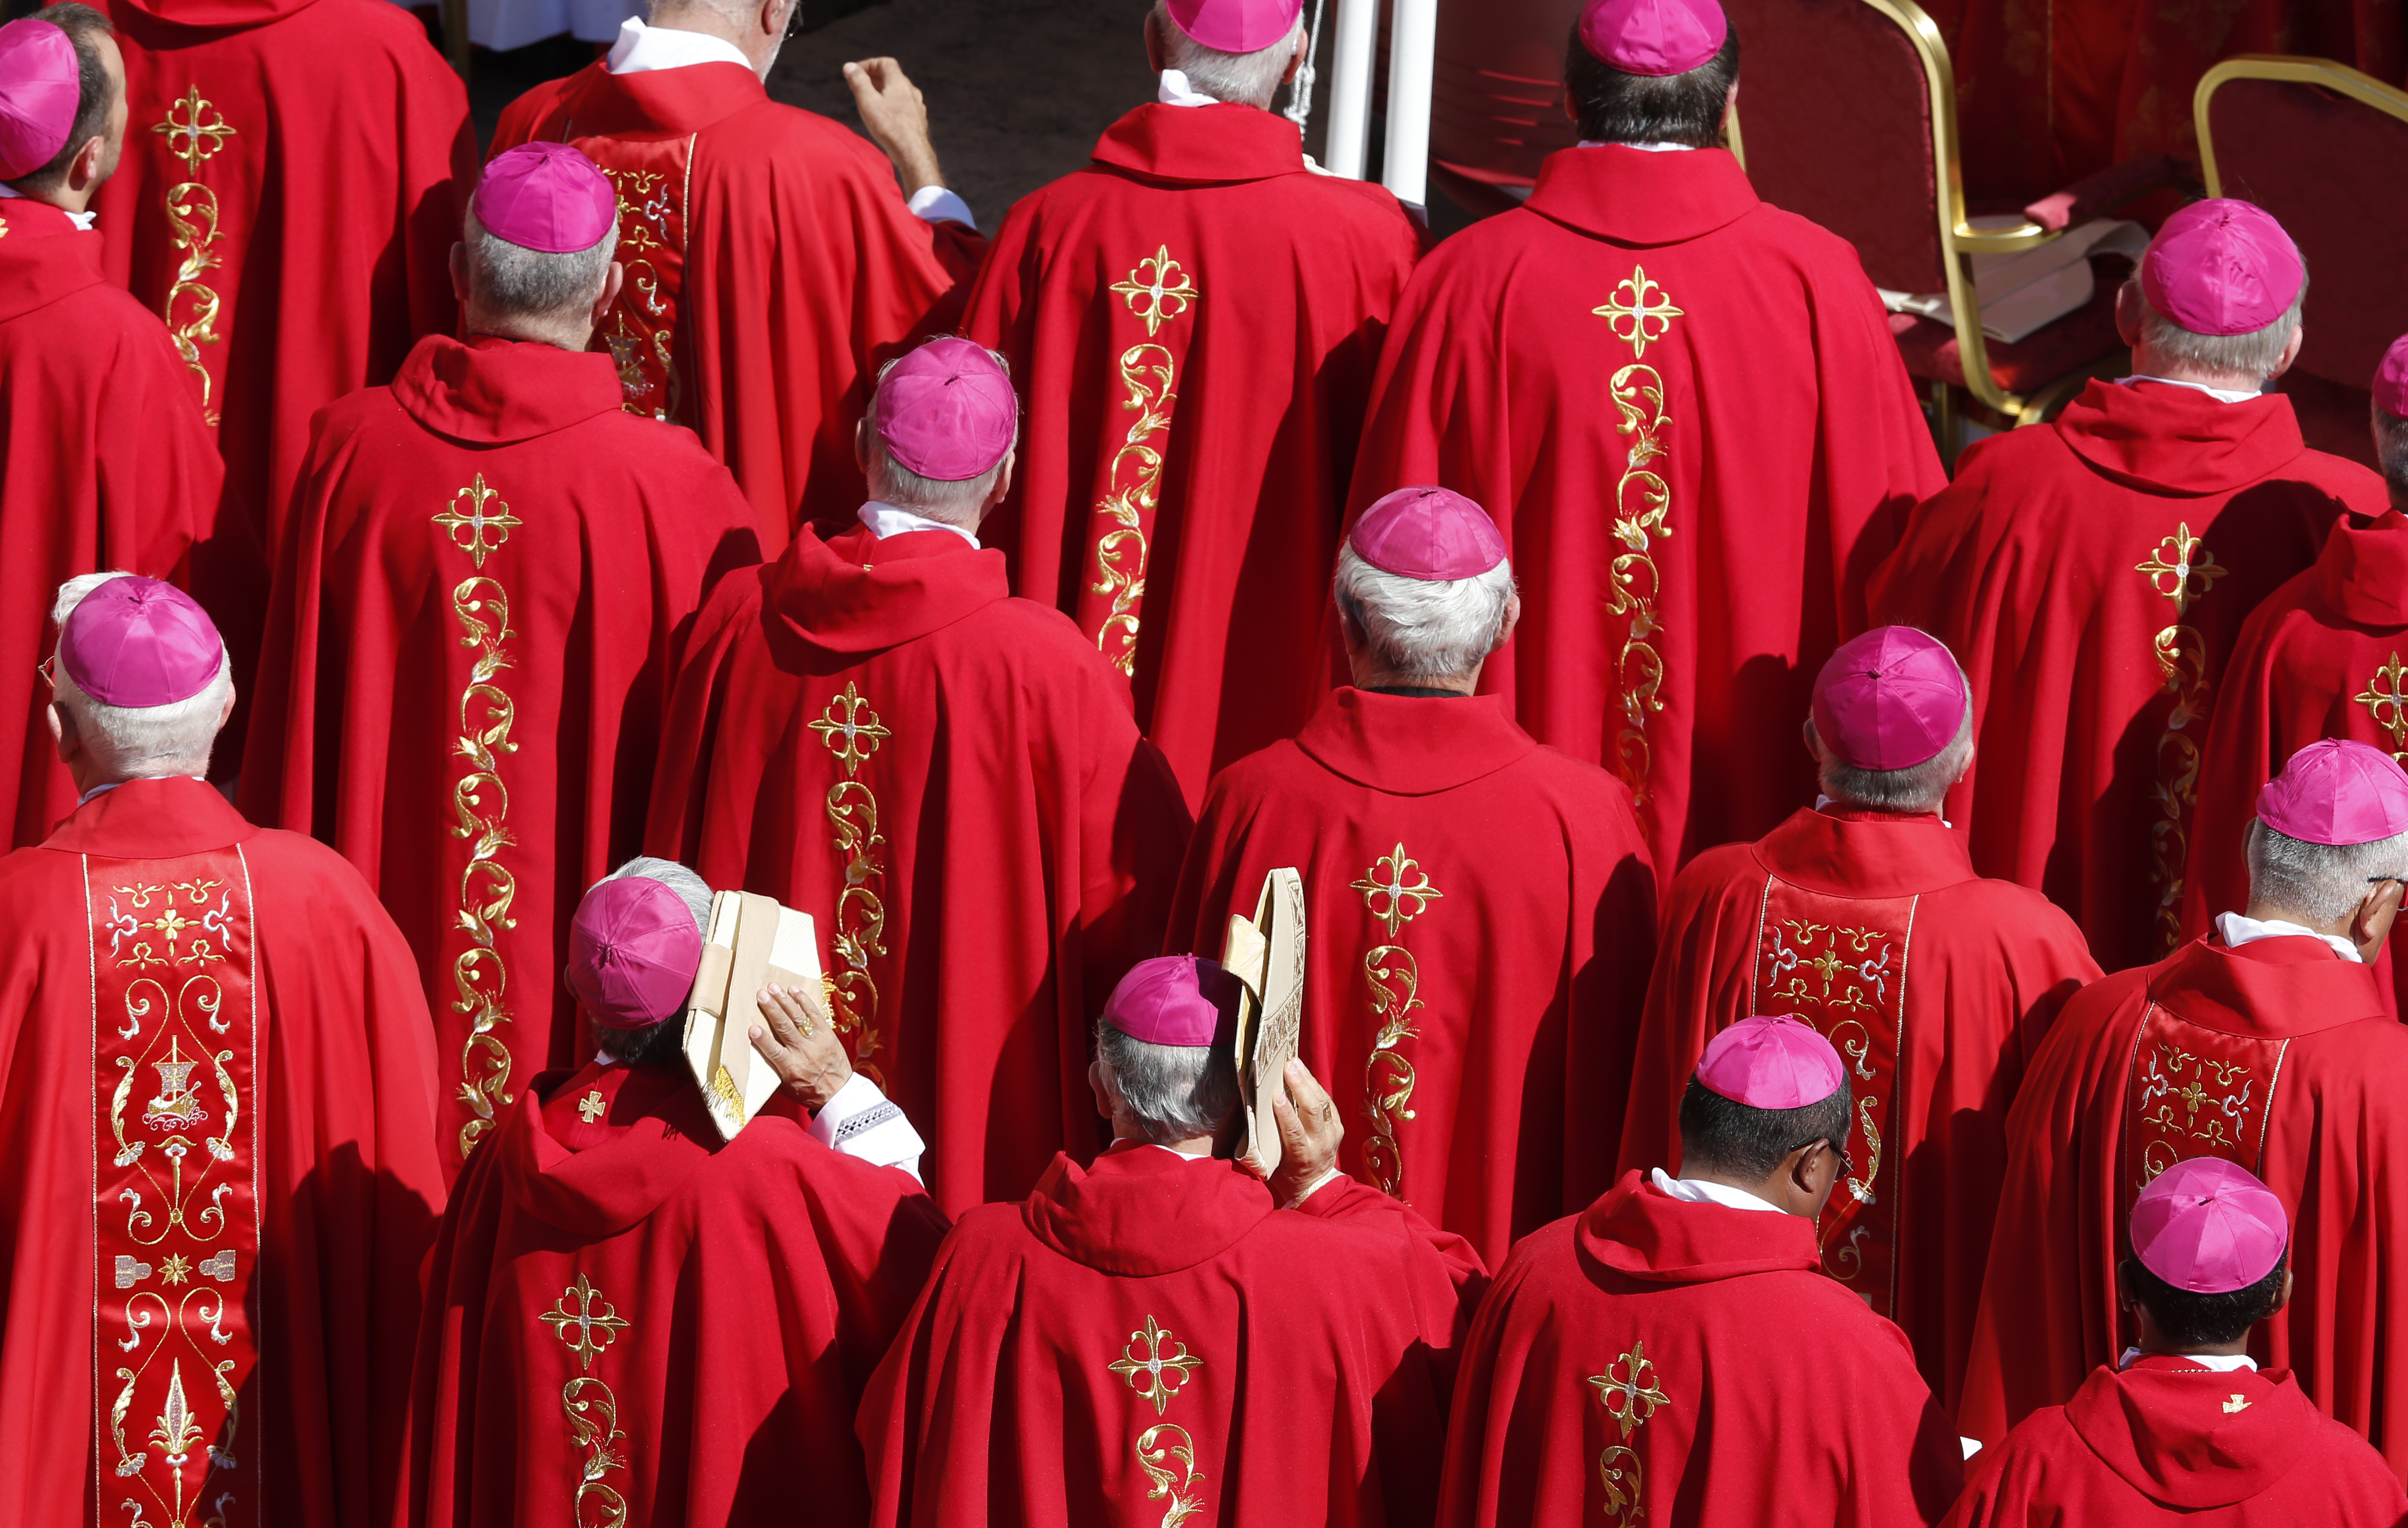 Pope at pallium Mass: Jesus wants disciples unafraid to aid others